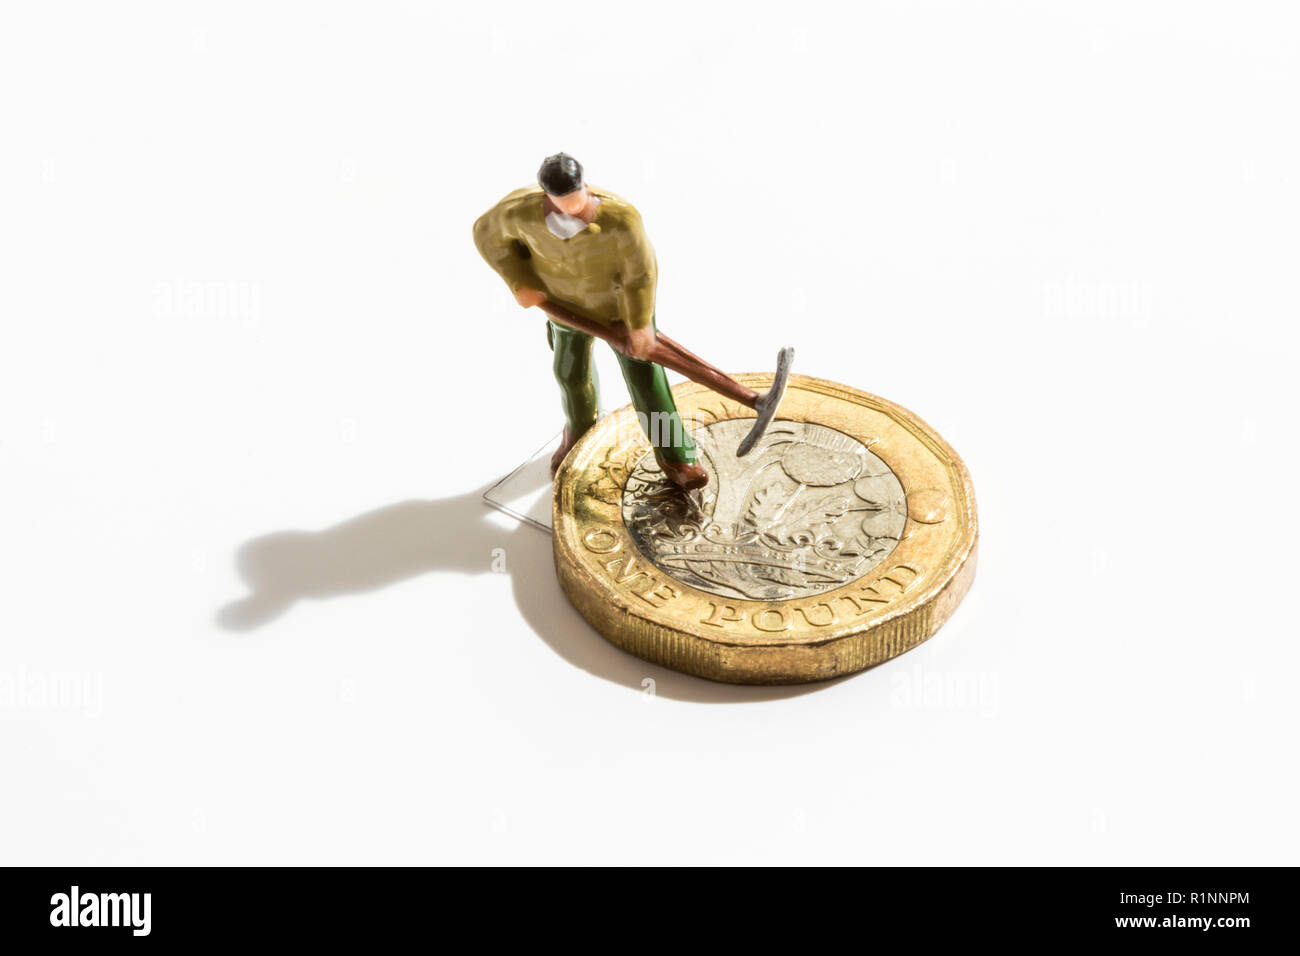 Making or destroying money. Pound coin with miniature workman. Stock Photo